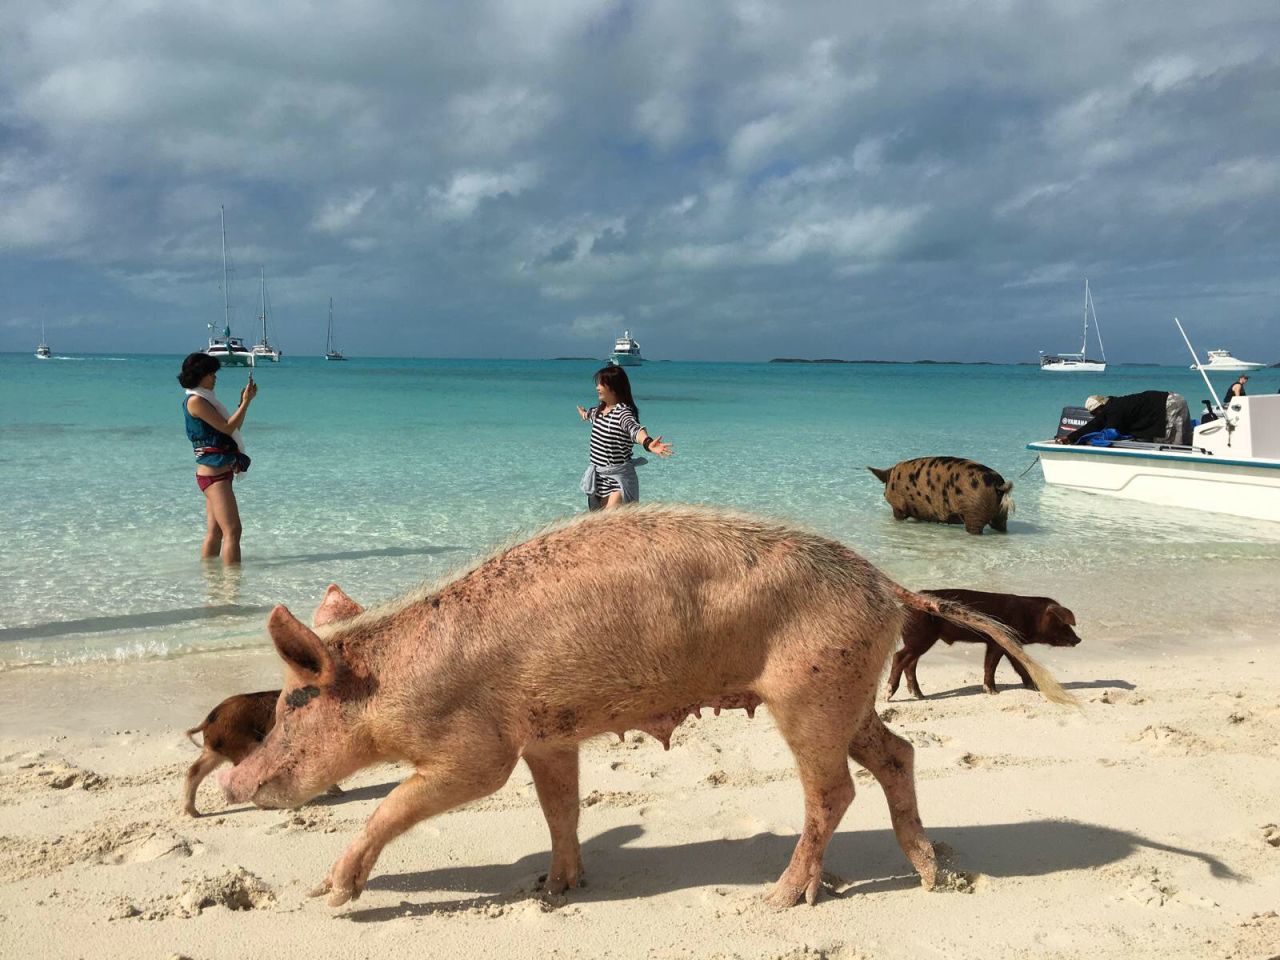 Peter Nicholson, partner and director of GIV Bahamas, decided in 2013 to market the Exumas using the pigs.